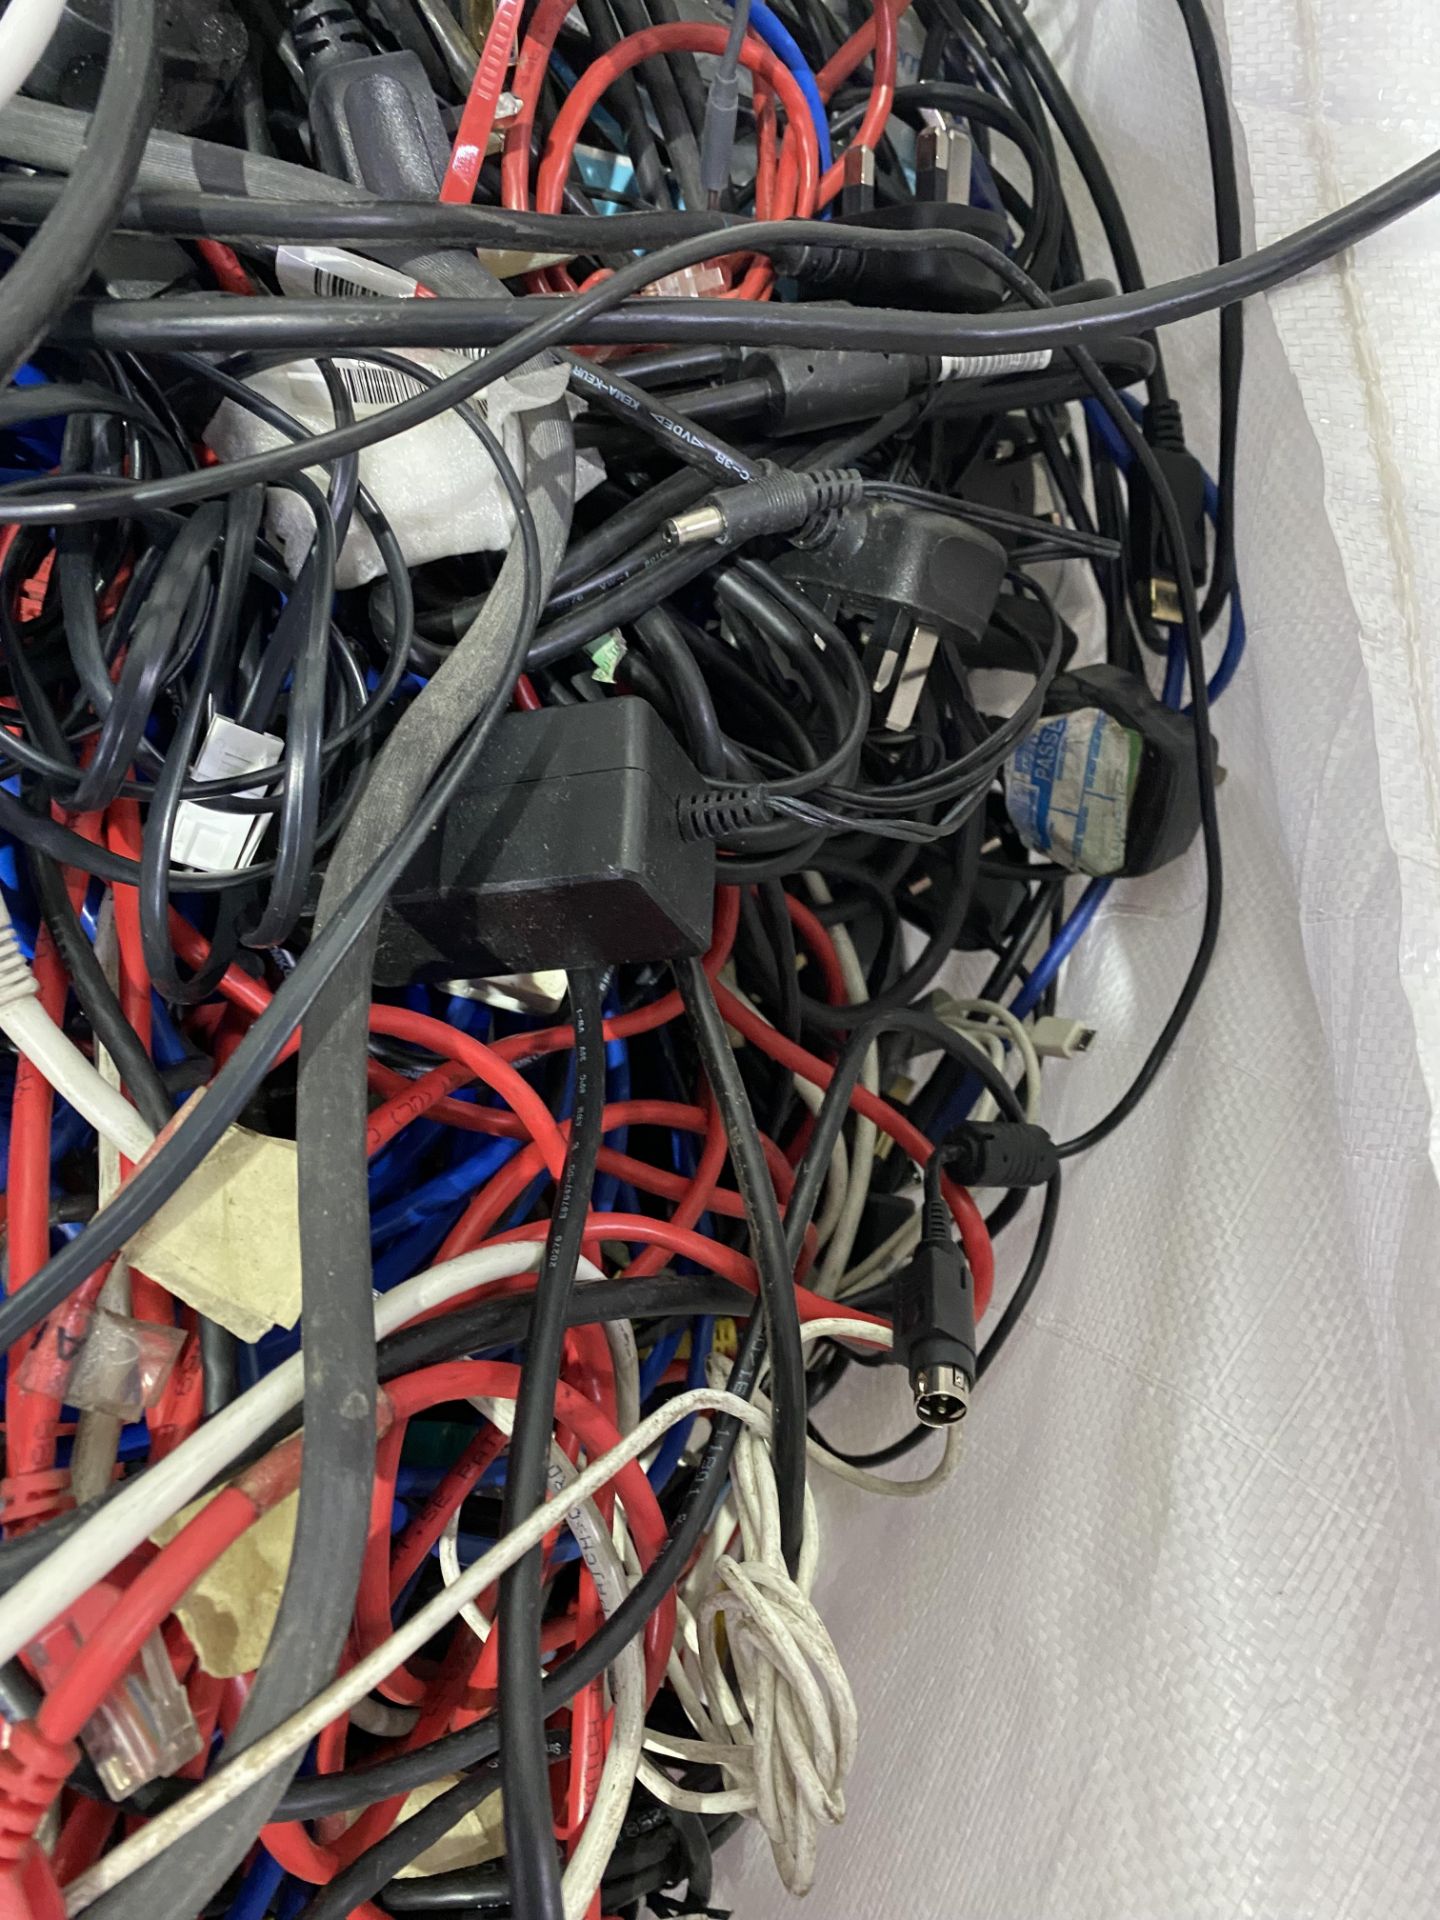 Large Quantity Of Various Electronic Wires, 140kg Bag - Image 9 of 12